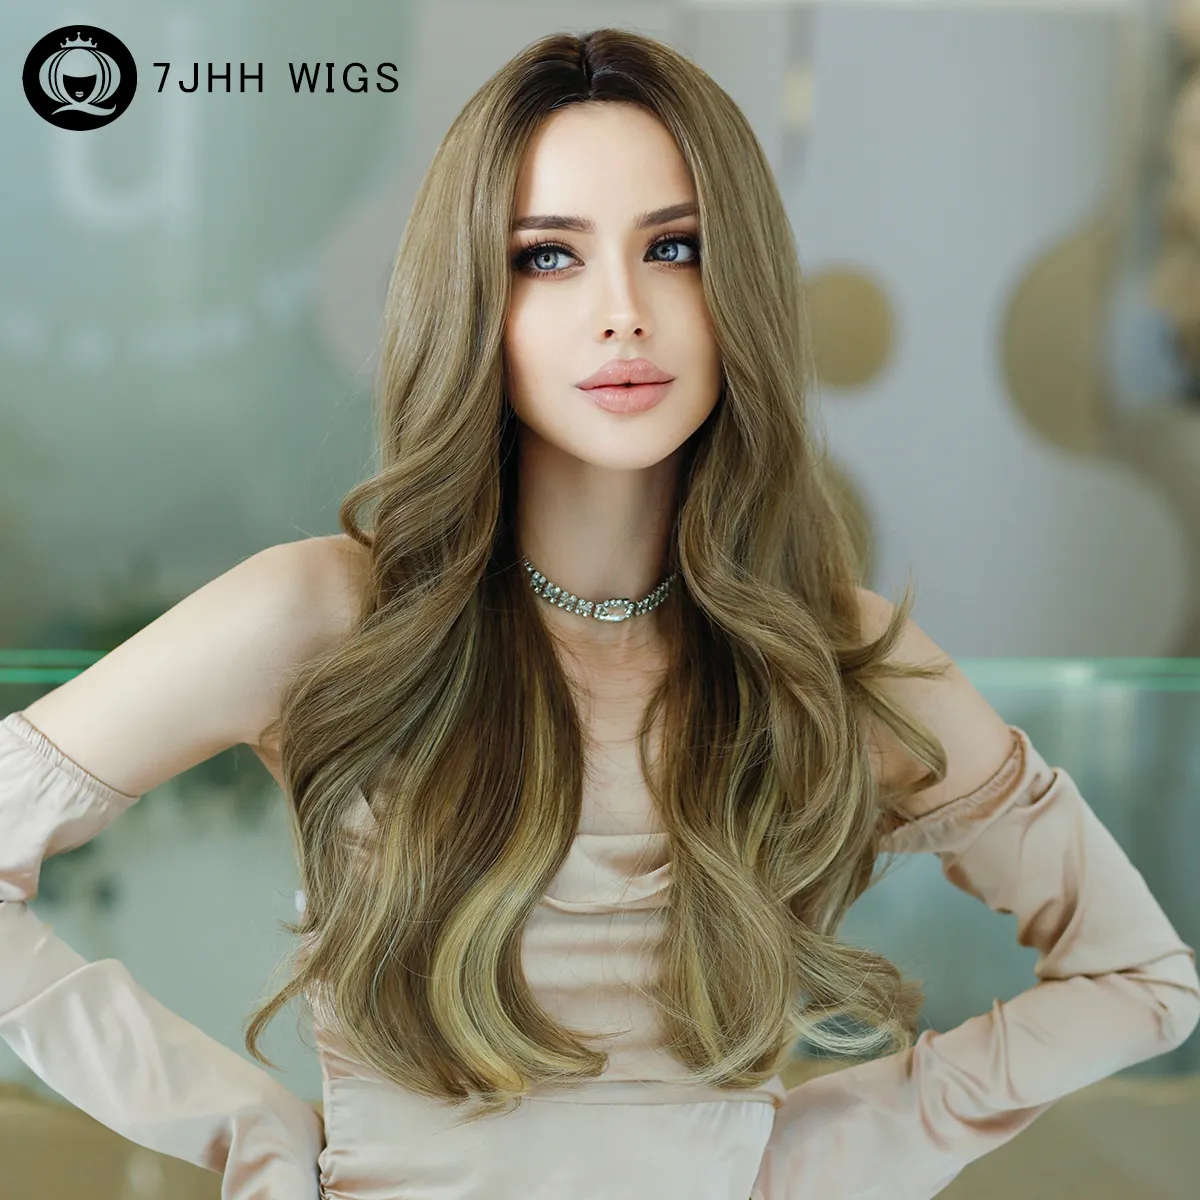 Highlights dark brown Long Wavy Wig with blonde Middle Part Synthetic Heart Resiatant Wig for Women Curly Hair Wig 24 Inches